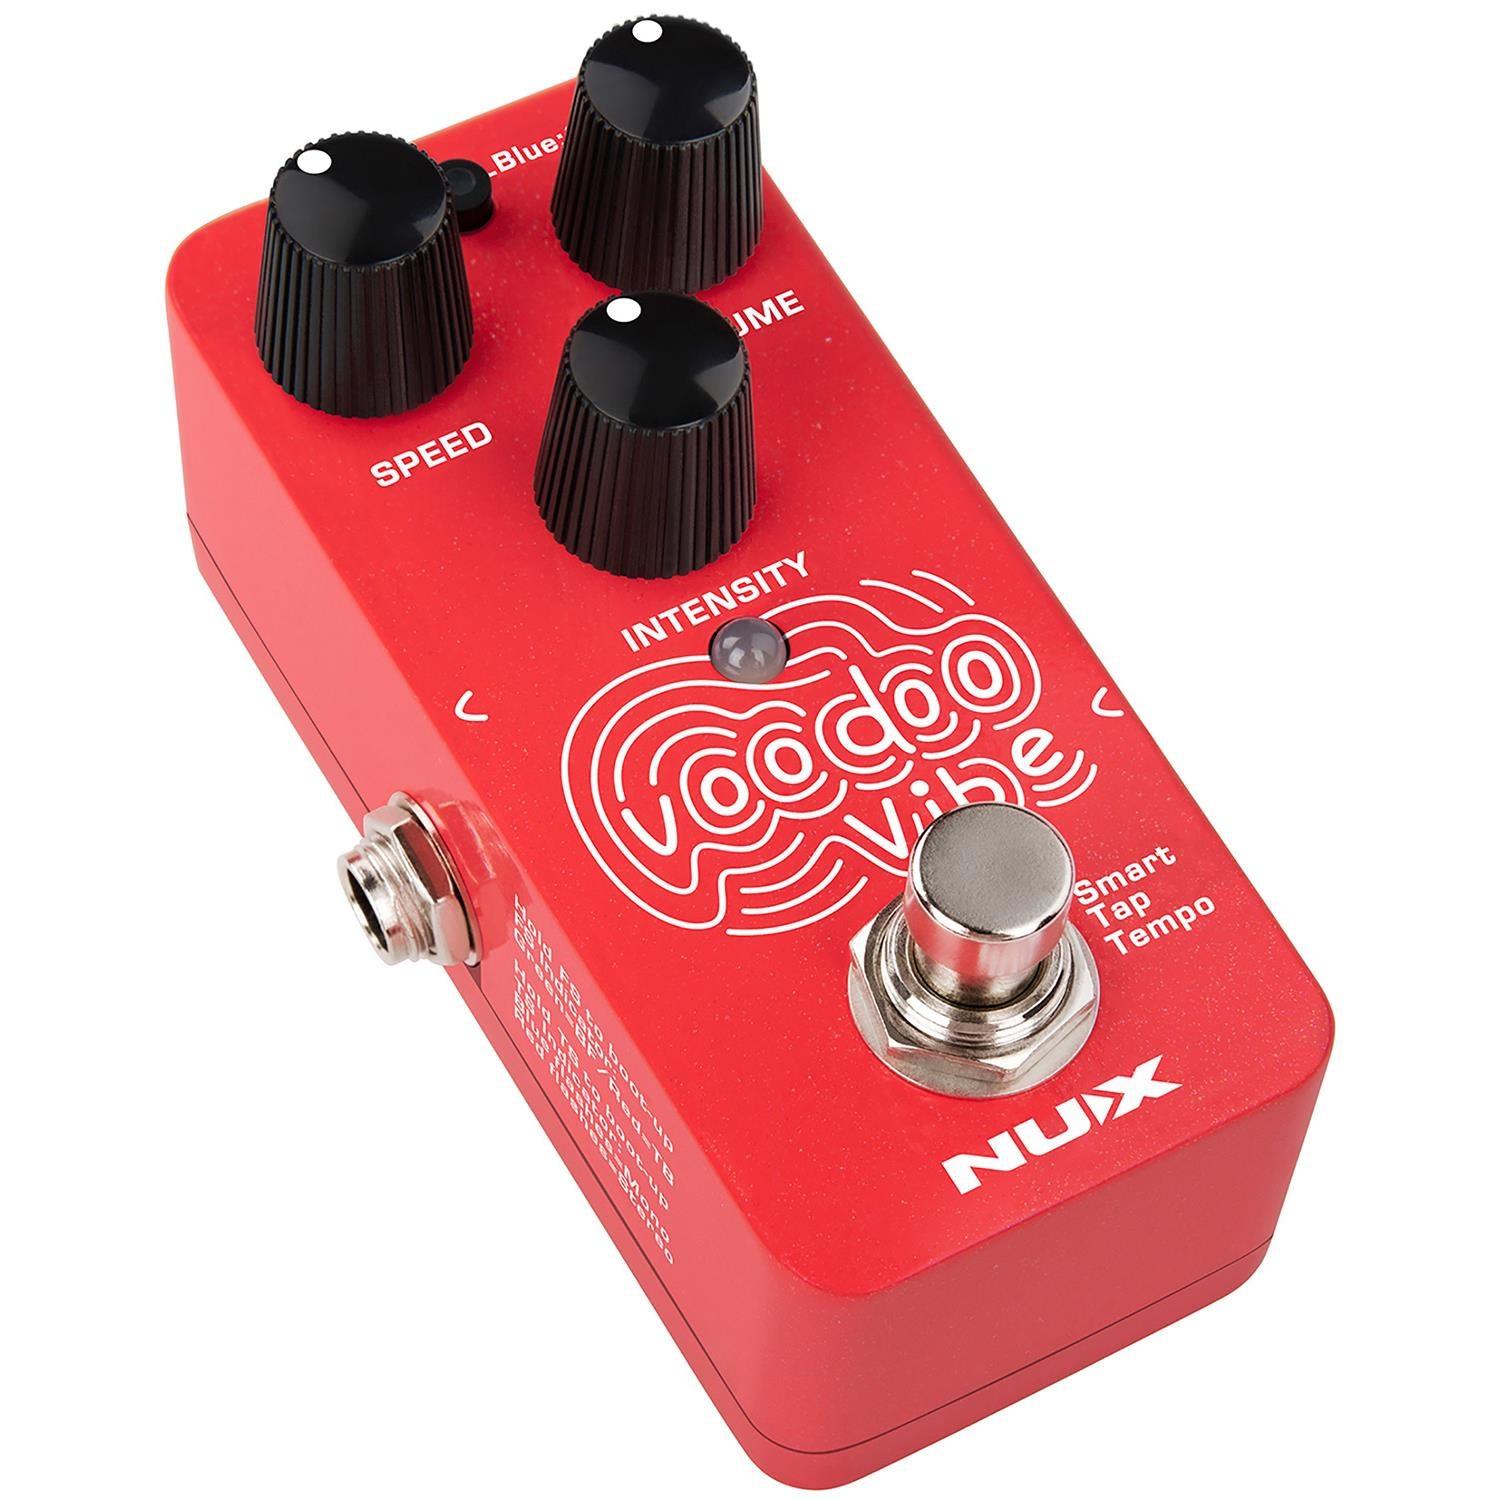 NUX Voodoo Vibe Mini Effect Pedal - DY Pro Audio